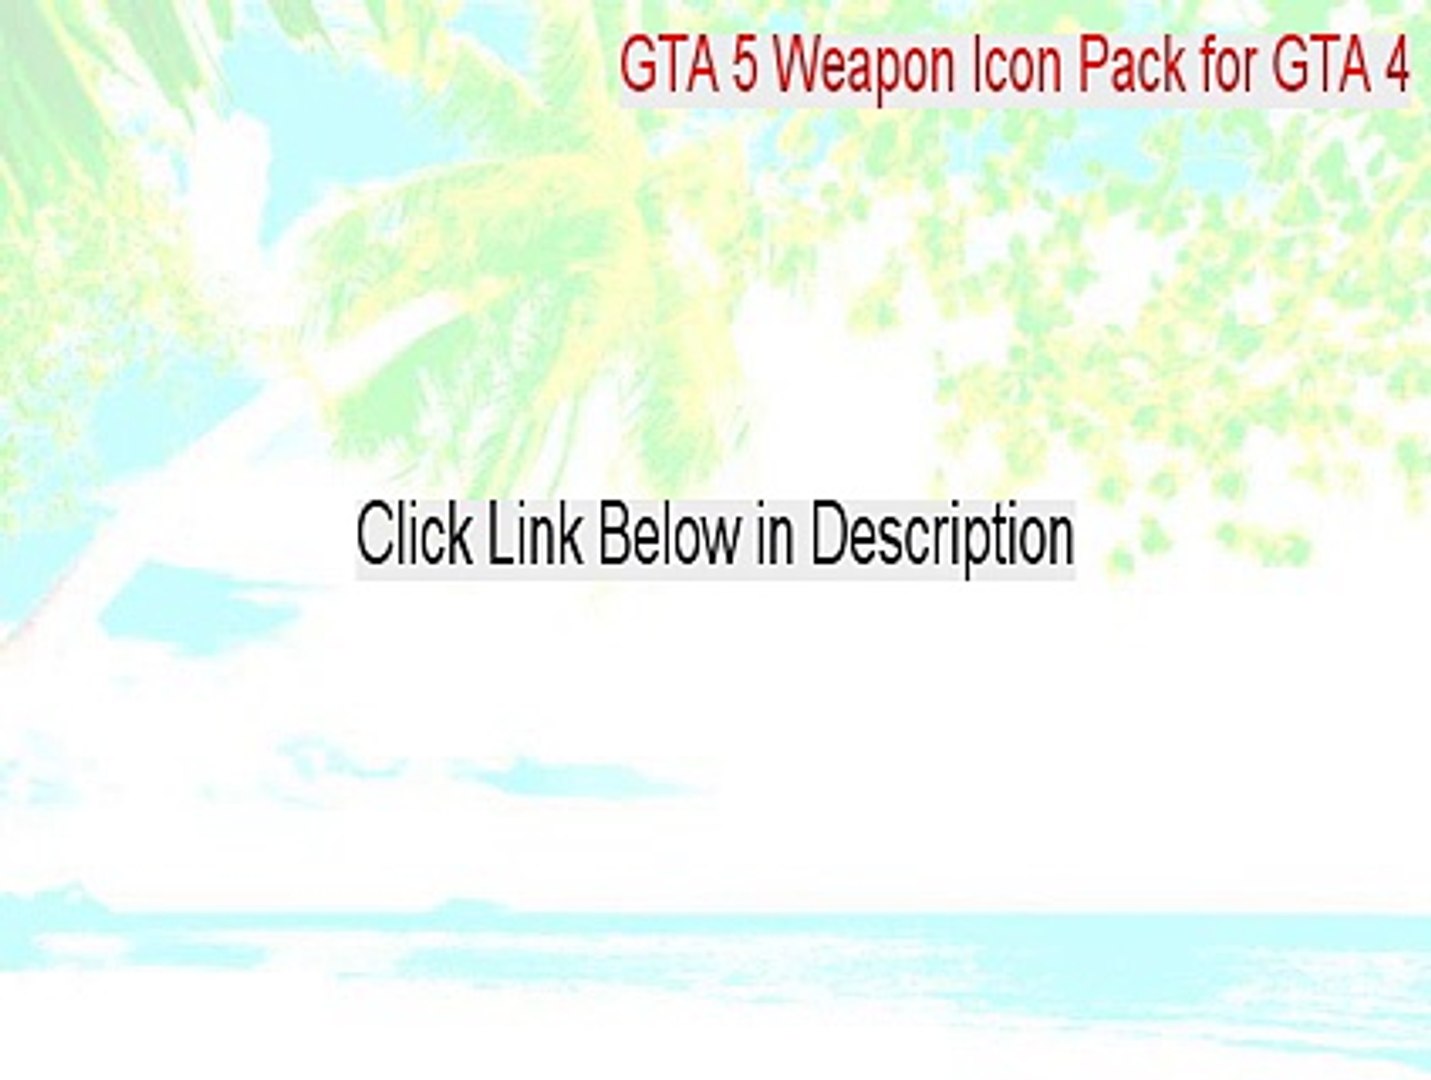 ⁣GTA 5 Weapon Icon Pack for GTA 4 Cracked [GTA 5 Weapon Icon Pack for GTA 4]